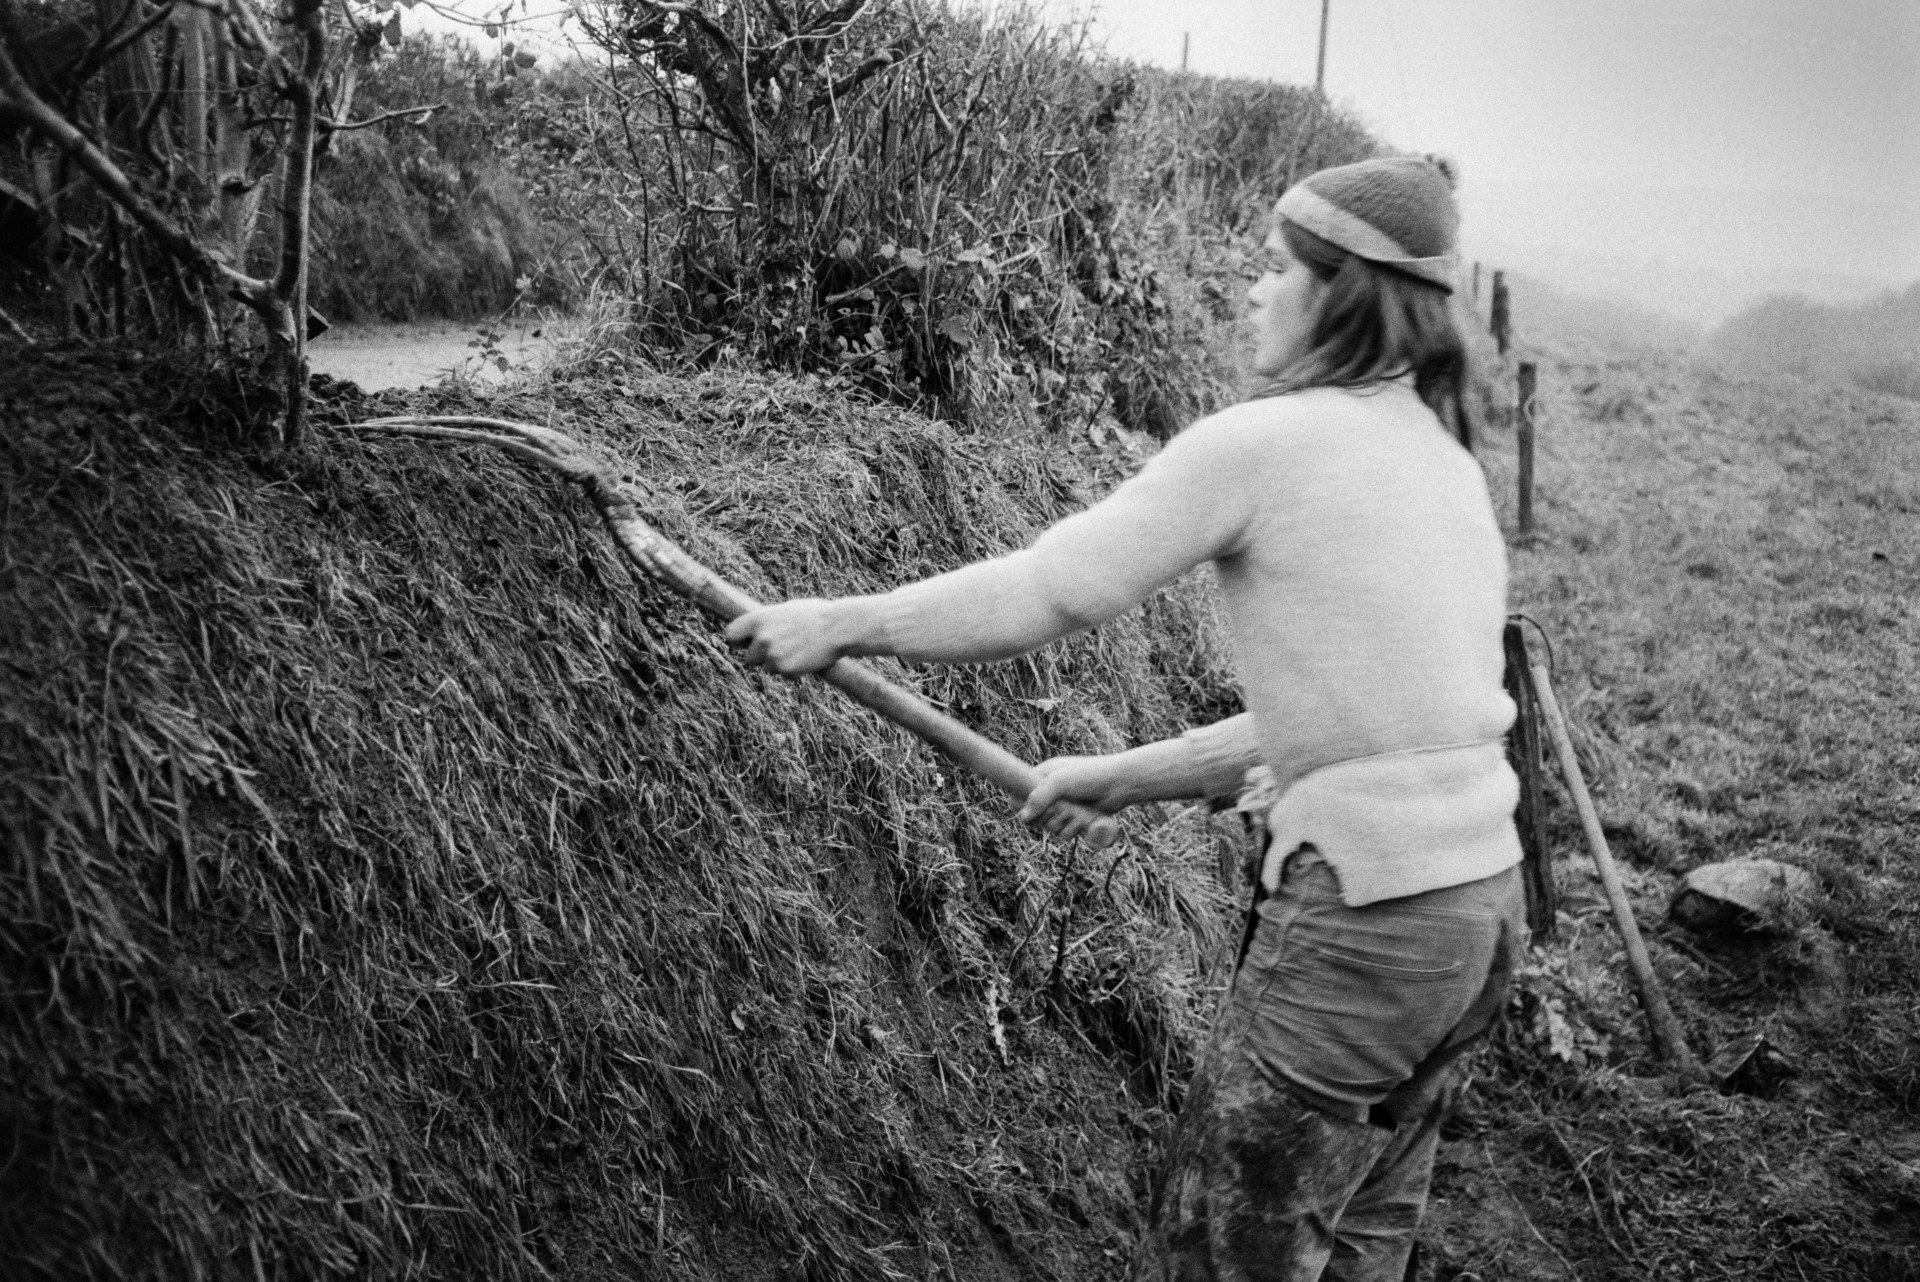 Derek Bright clatting, building up a hedge bank with turf, in a field at Mill Road Farm, Beaford. He is using a fork. The farm was also known as Jeffrys.